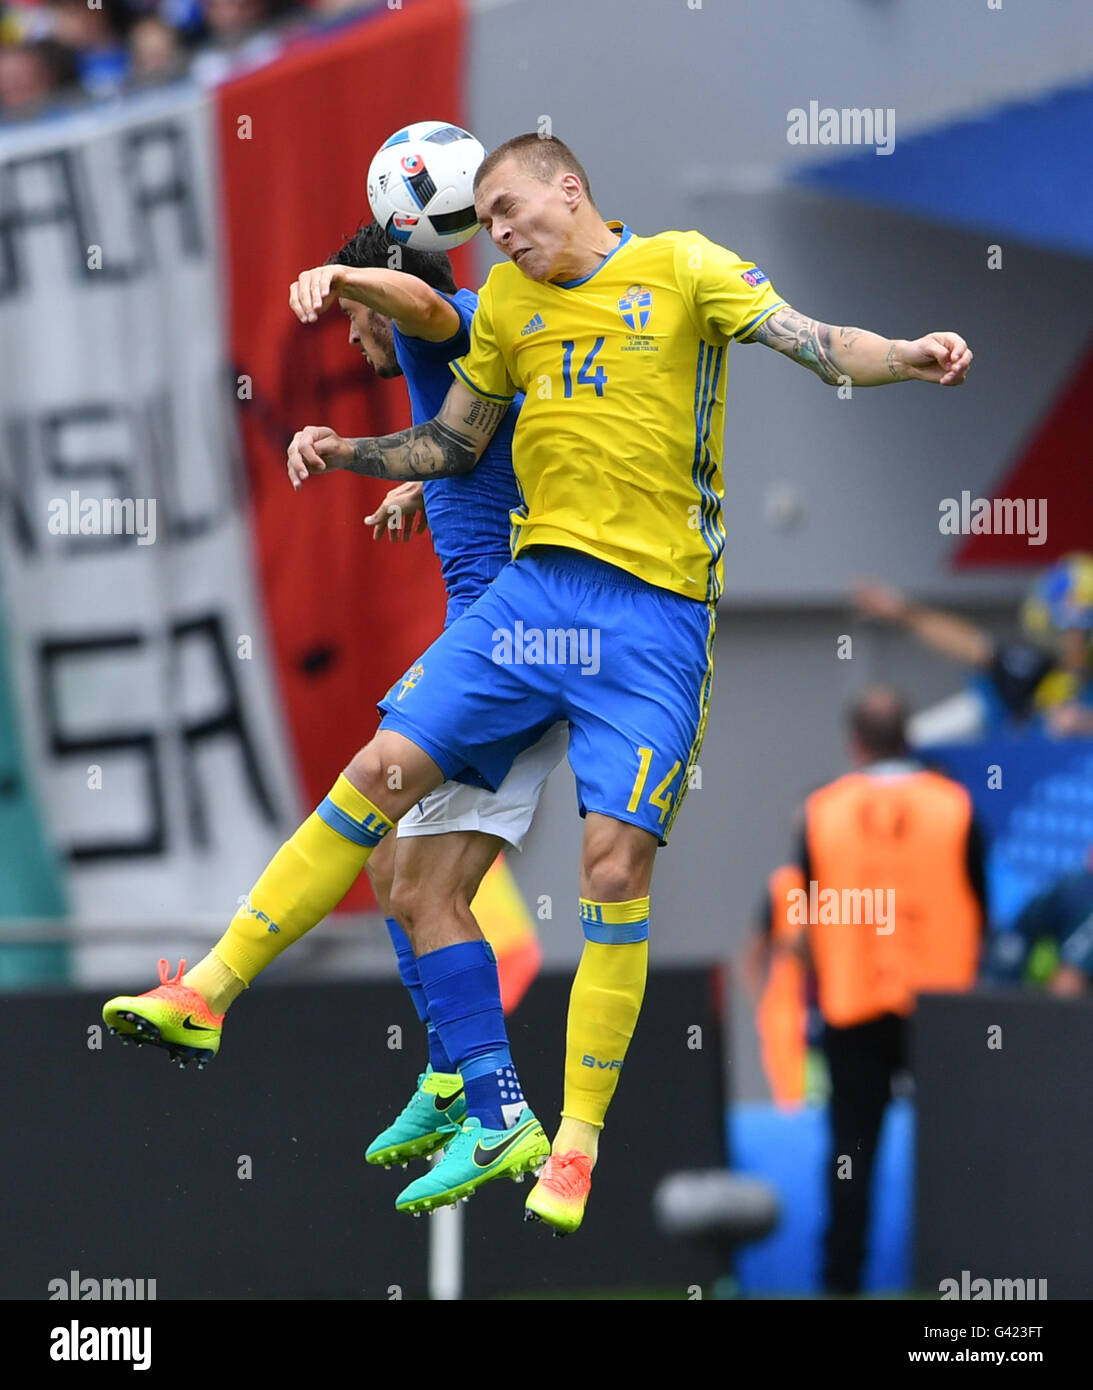 Toulouse, France. 17th June, 2016. Sweden's Victor Lindelof (R) vies for the ball during the UEFA Euro 2016 group E match between Italy and Sweden at the Stadium Municipal in Toulouse, France, June 17, 2016. Credit:  Tao Xiyi/Xinhua/Alamy Live News Stock Photo